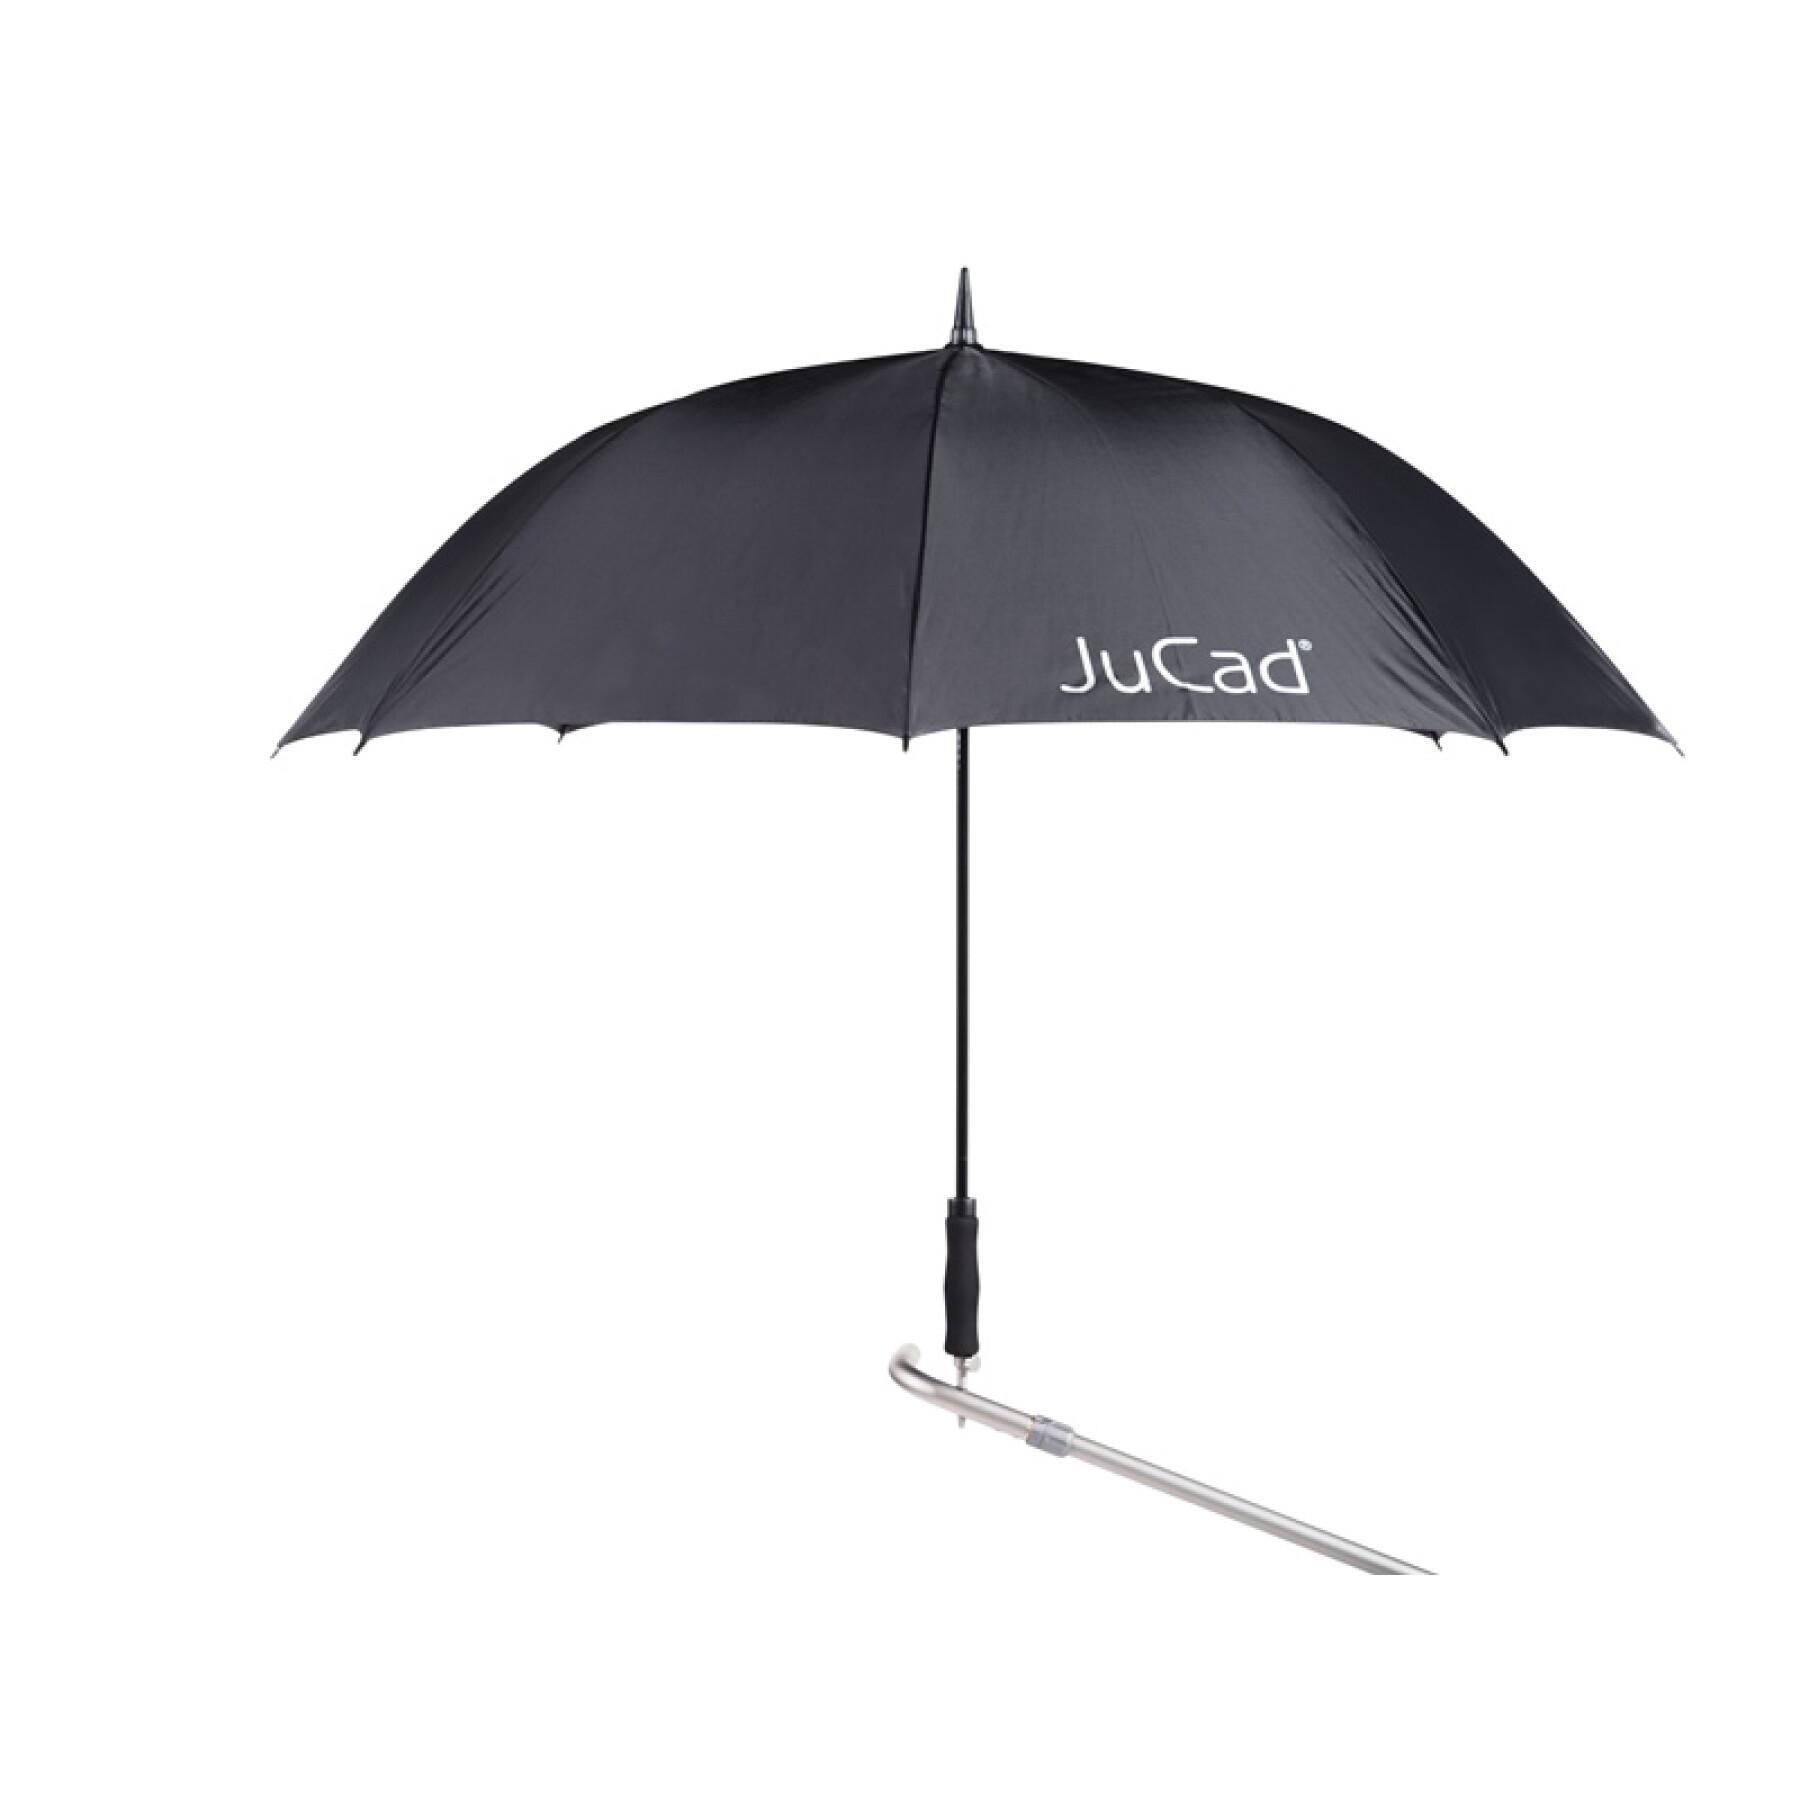 Telescopic umbrella with automatic opening mechanism and shaft JuCad